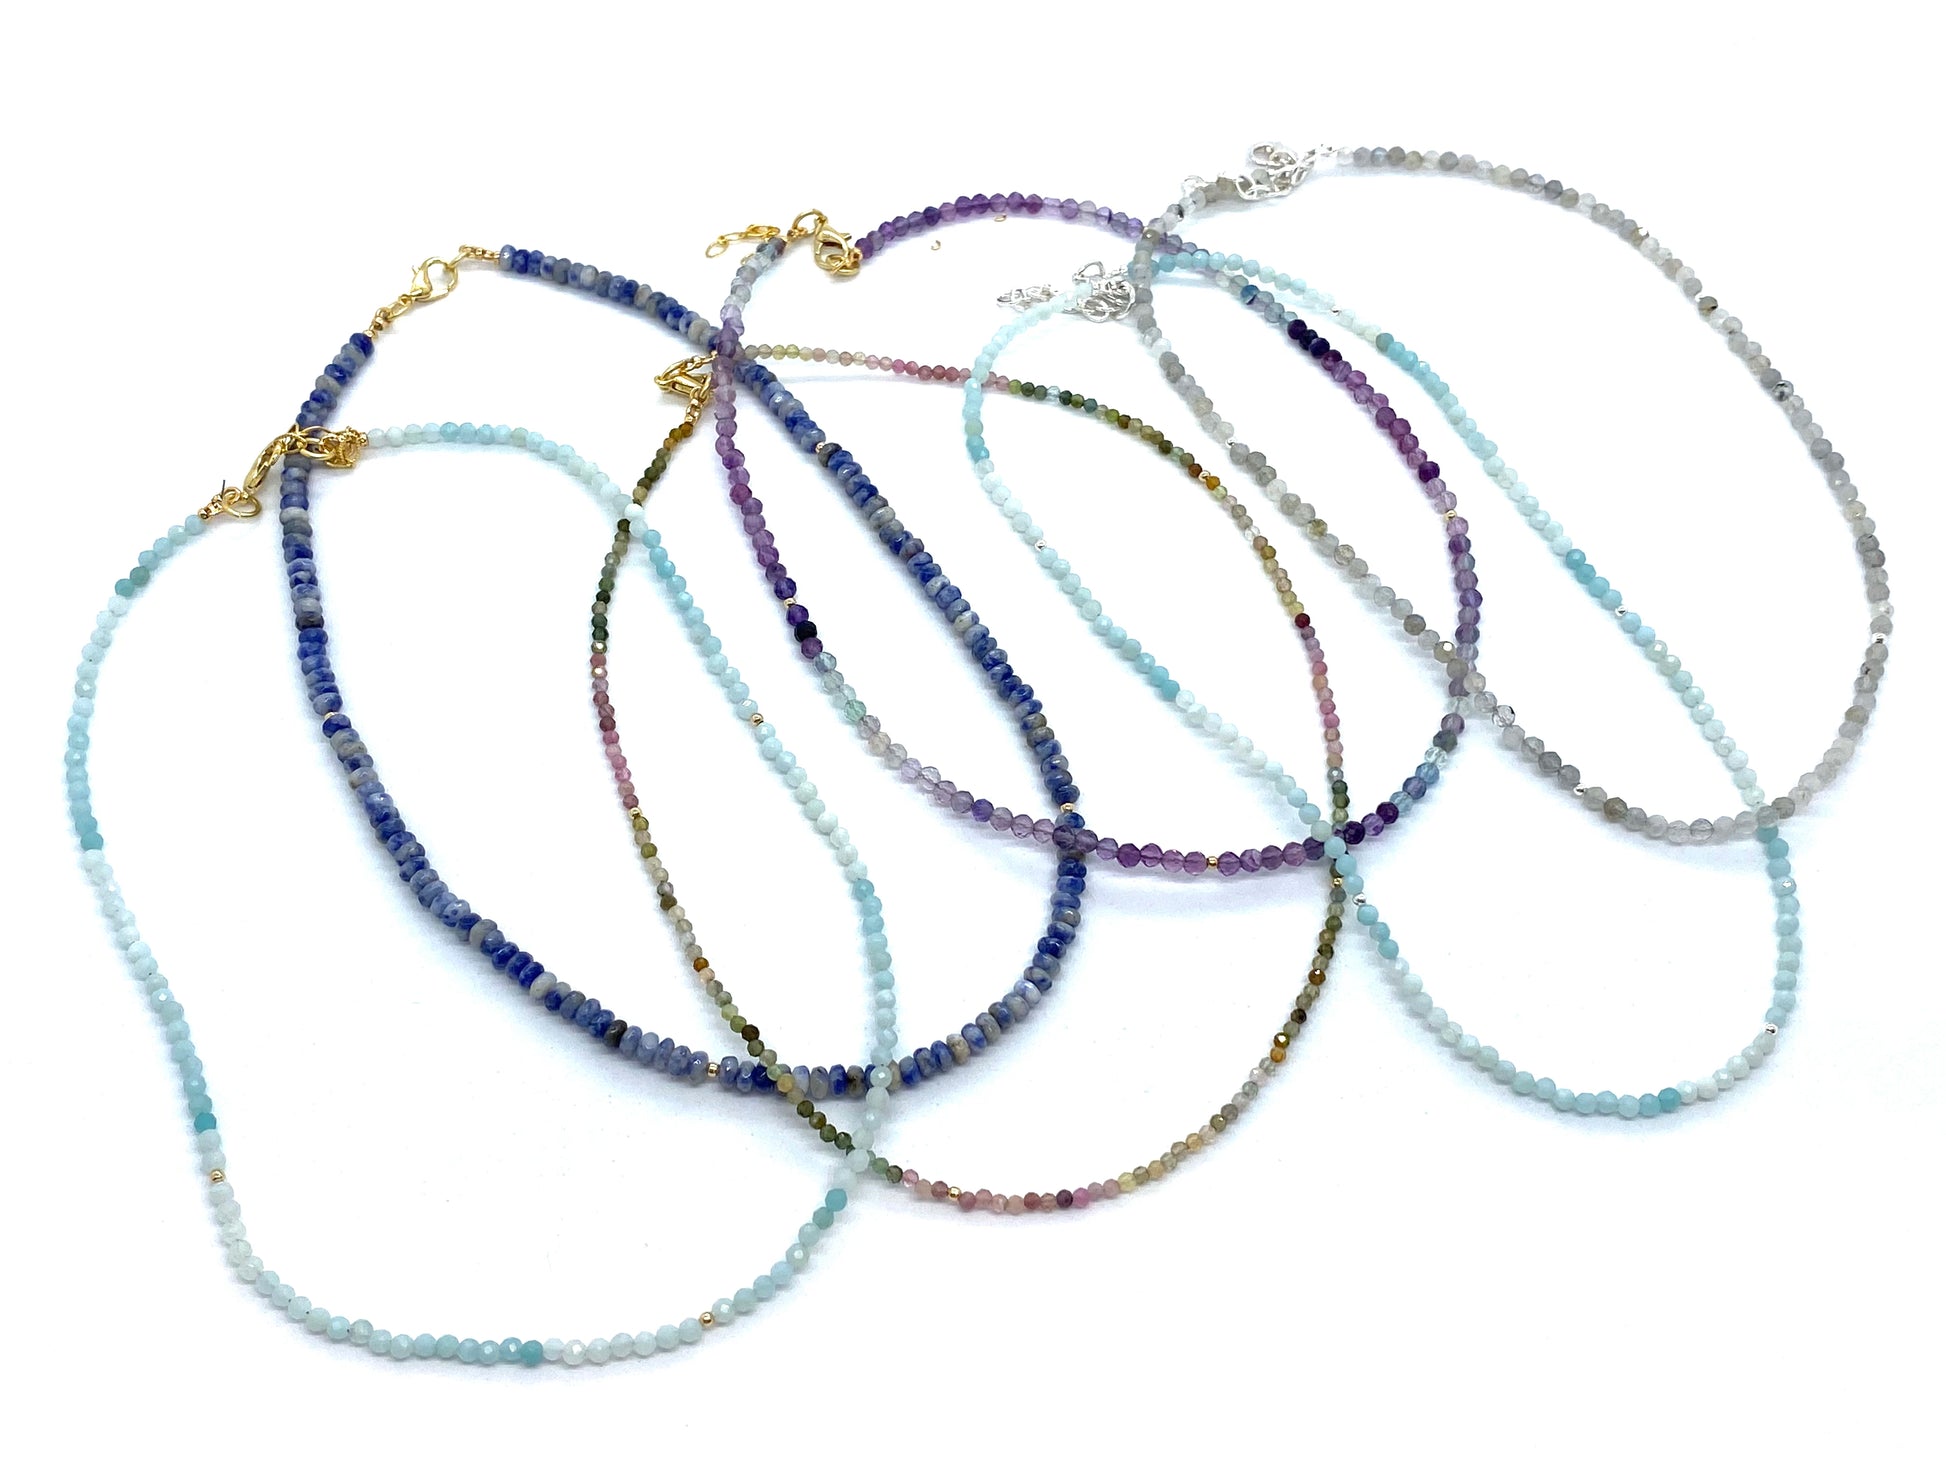 Short gemstone necklaces - Emmis Jewelry, Necklace, [product_color]